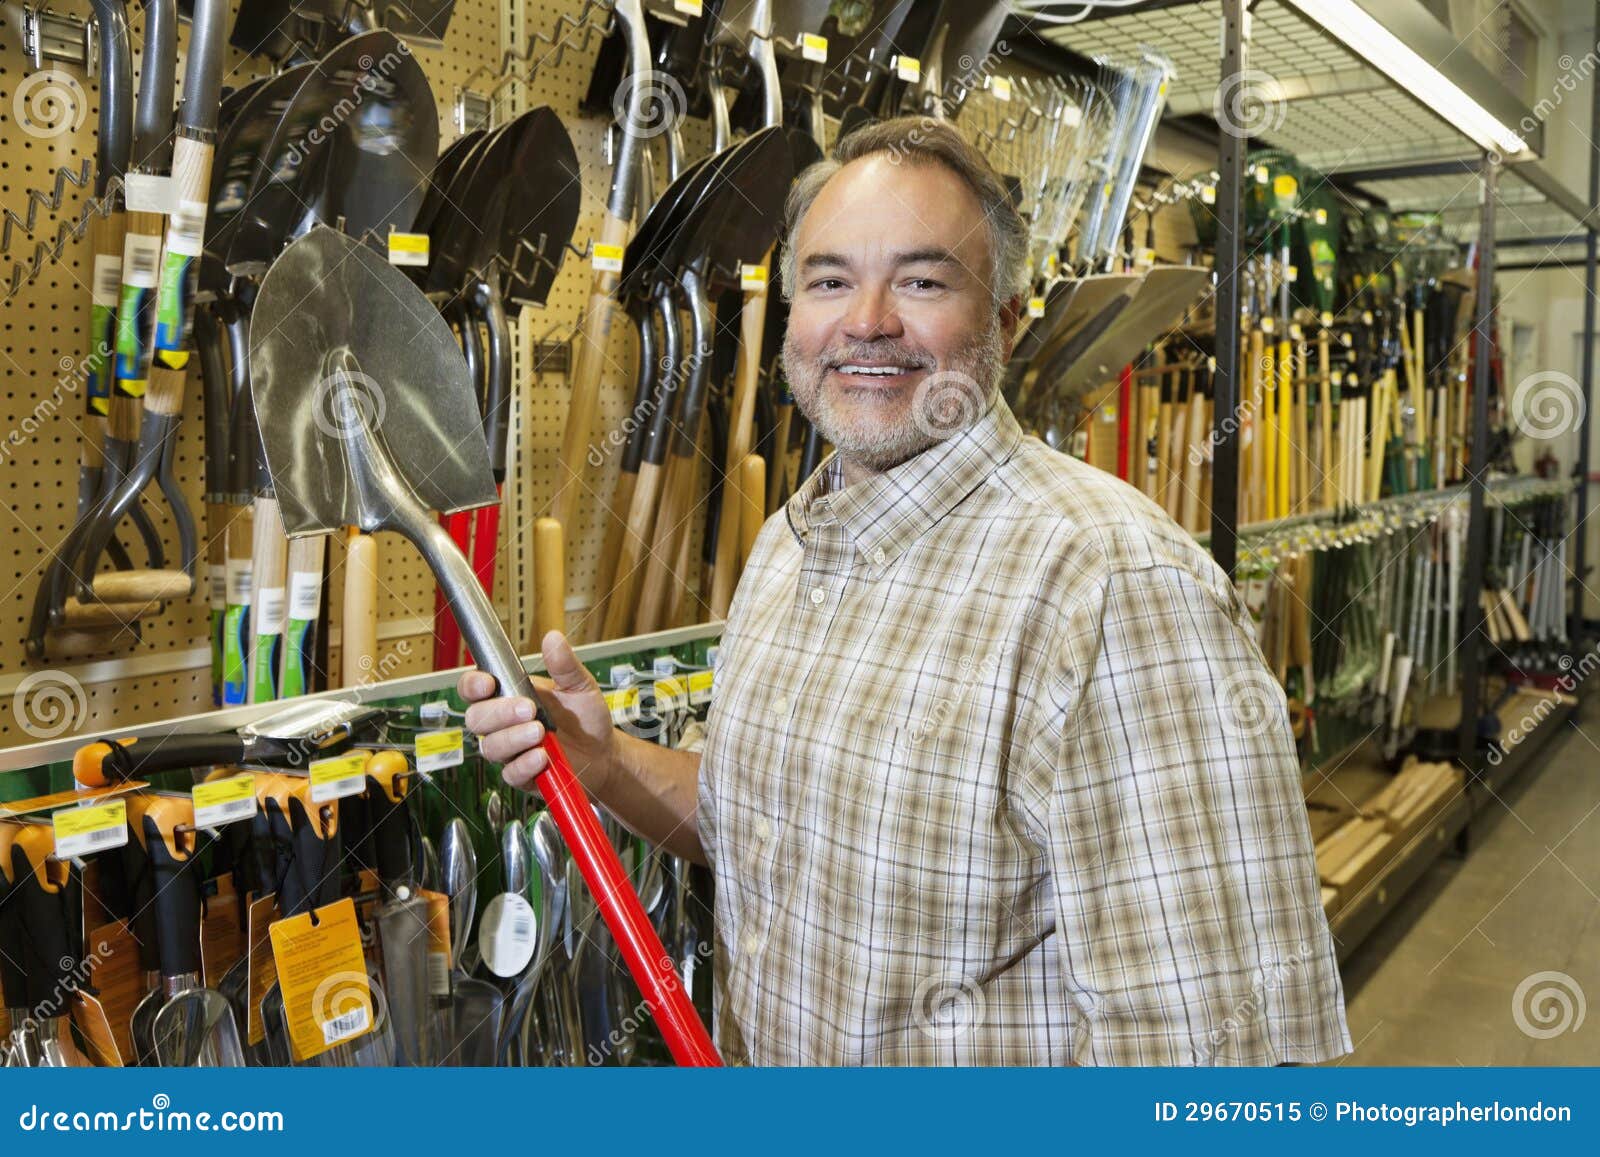 portrait of a happy mature man holding shovel in hardware store